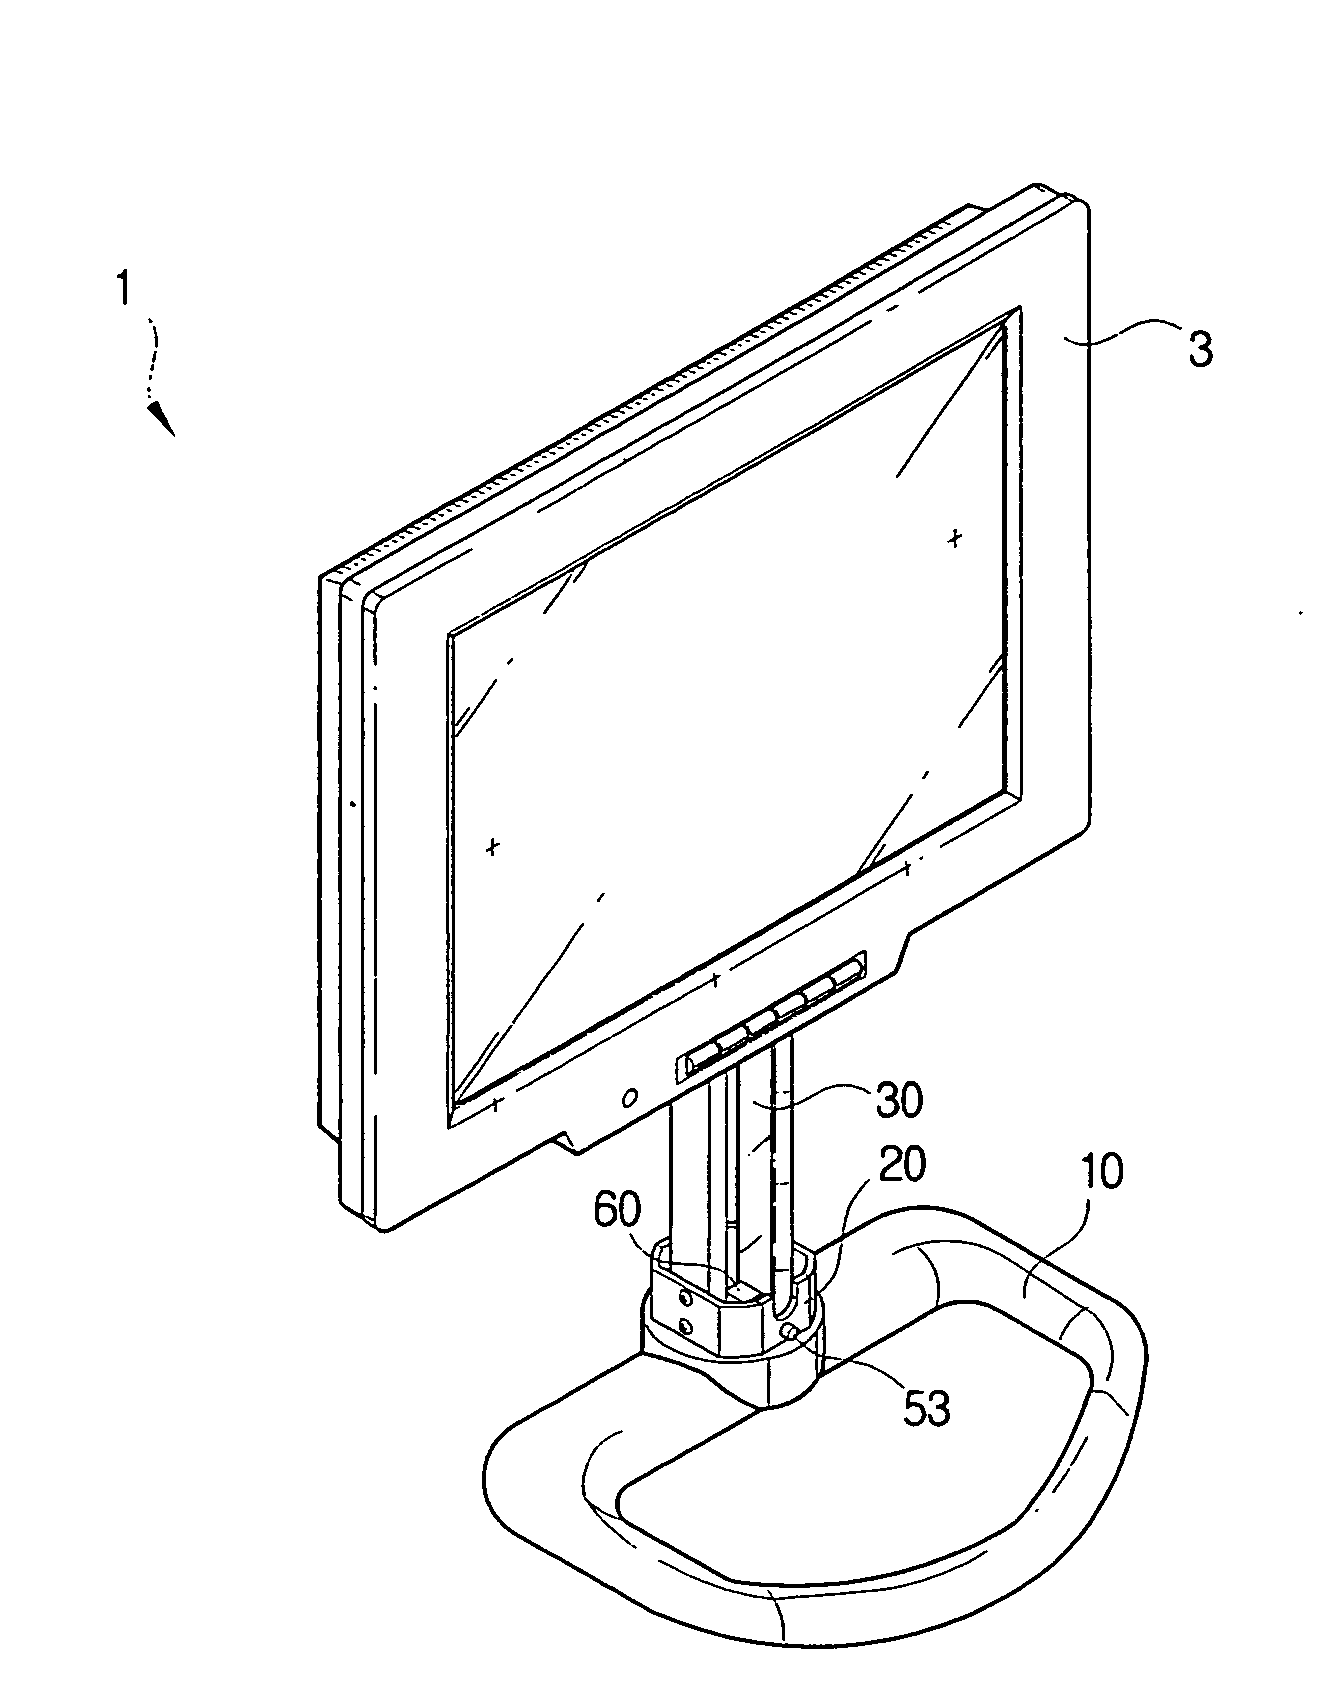 Stand for supporting a monitor main body